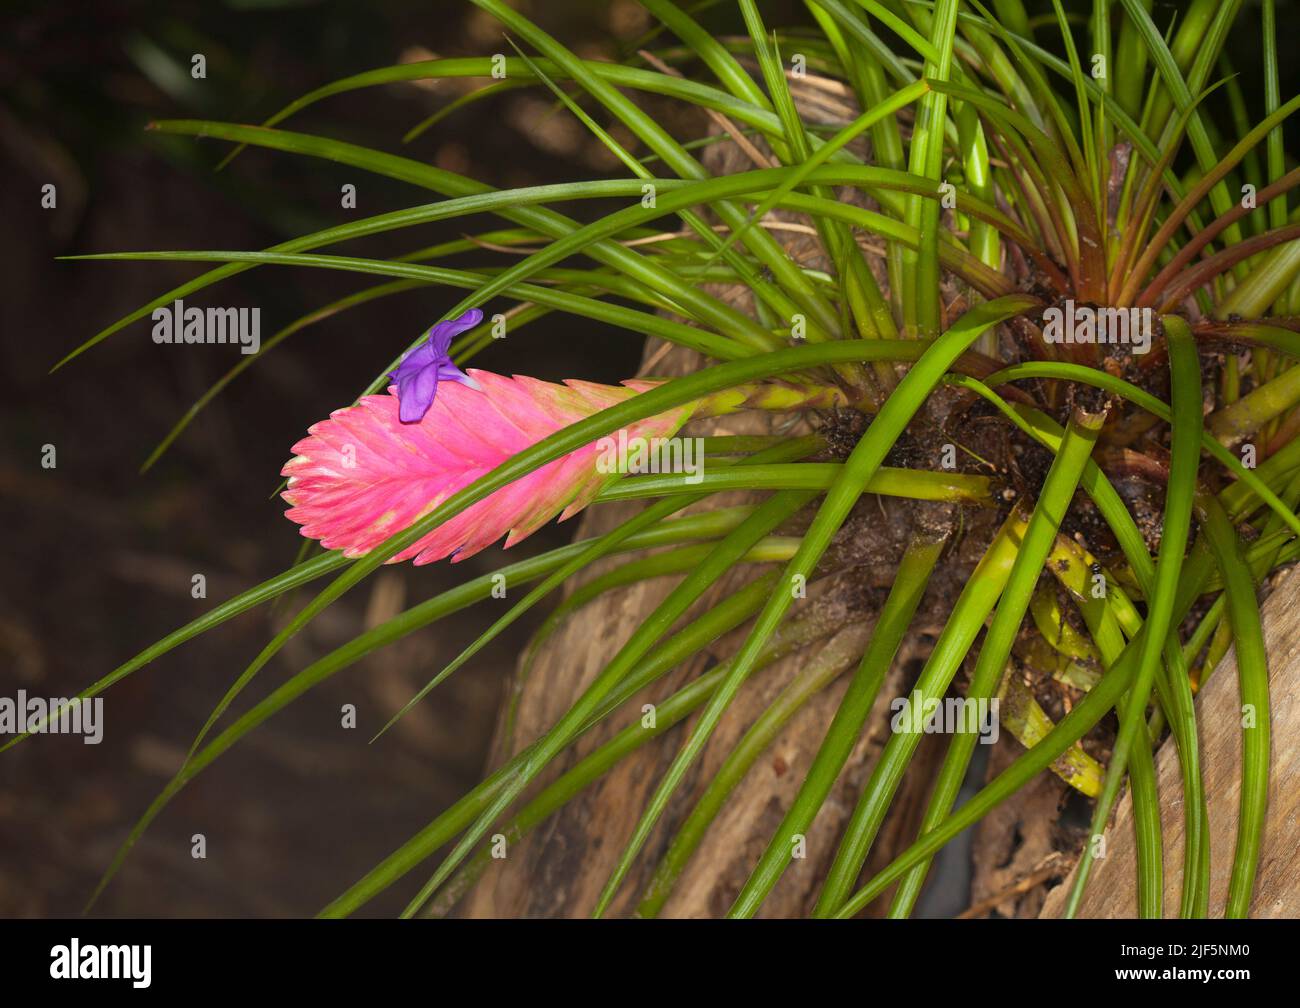 Long green leaves, vivid pink bracts and purple perfumed flower of Tillandsia cyanea, a bromeliad growing in a wooden stump in a garden in Australia Stock Photo